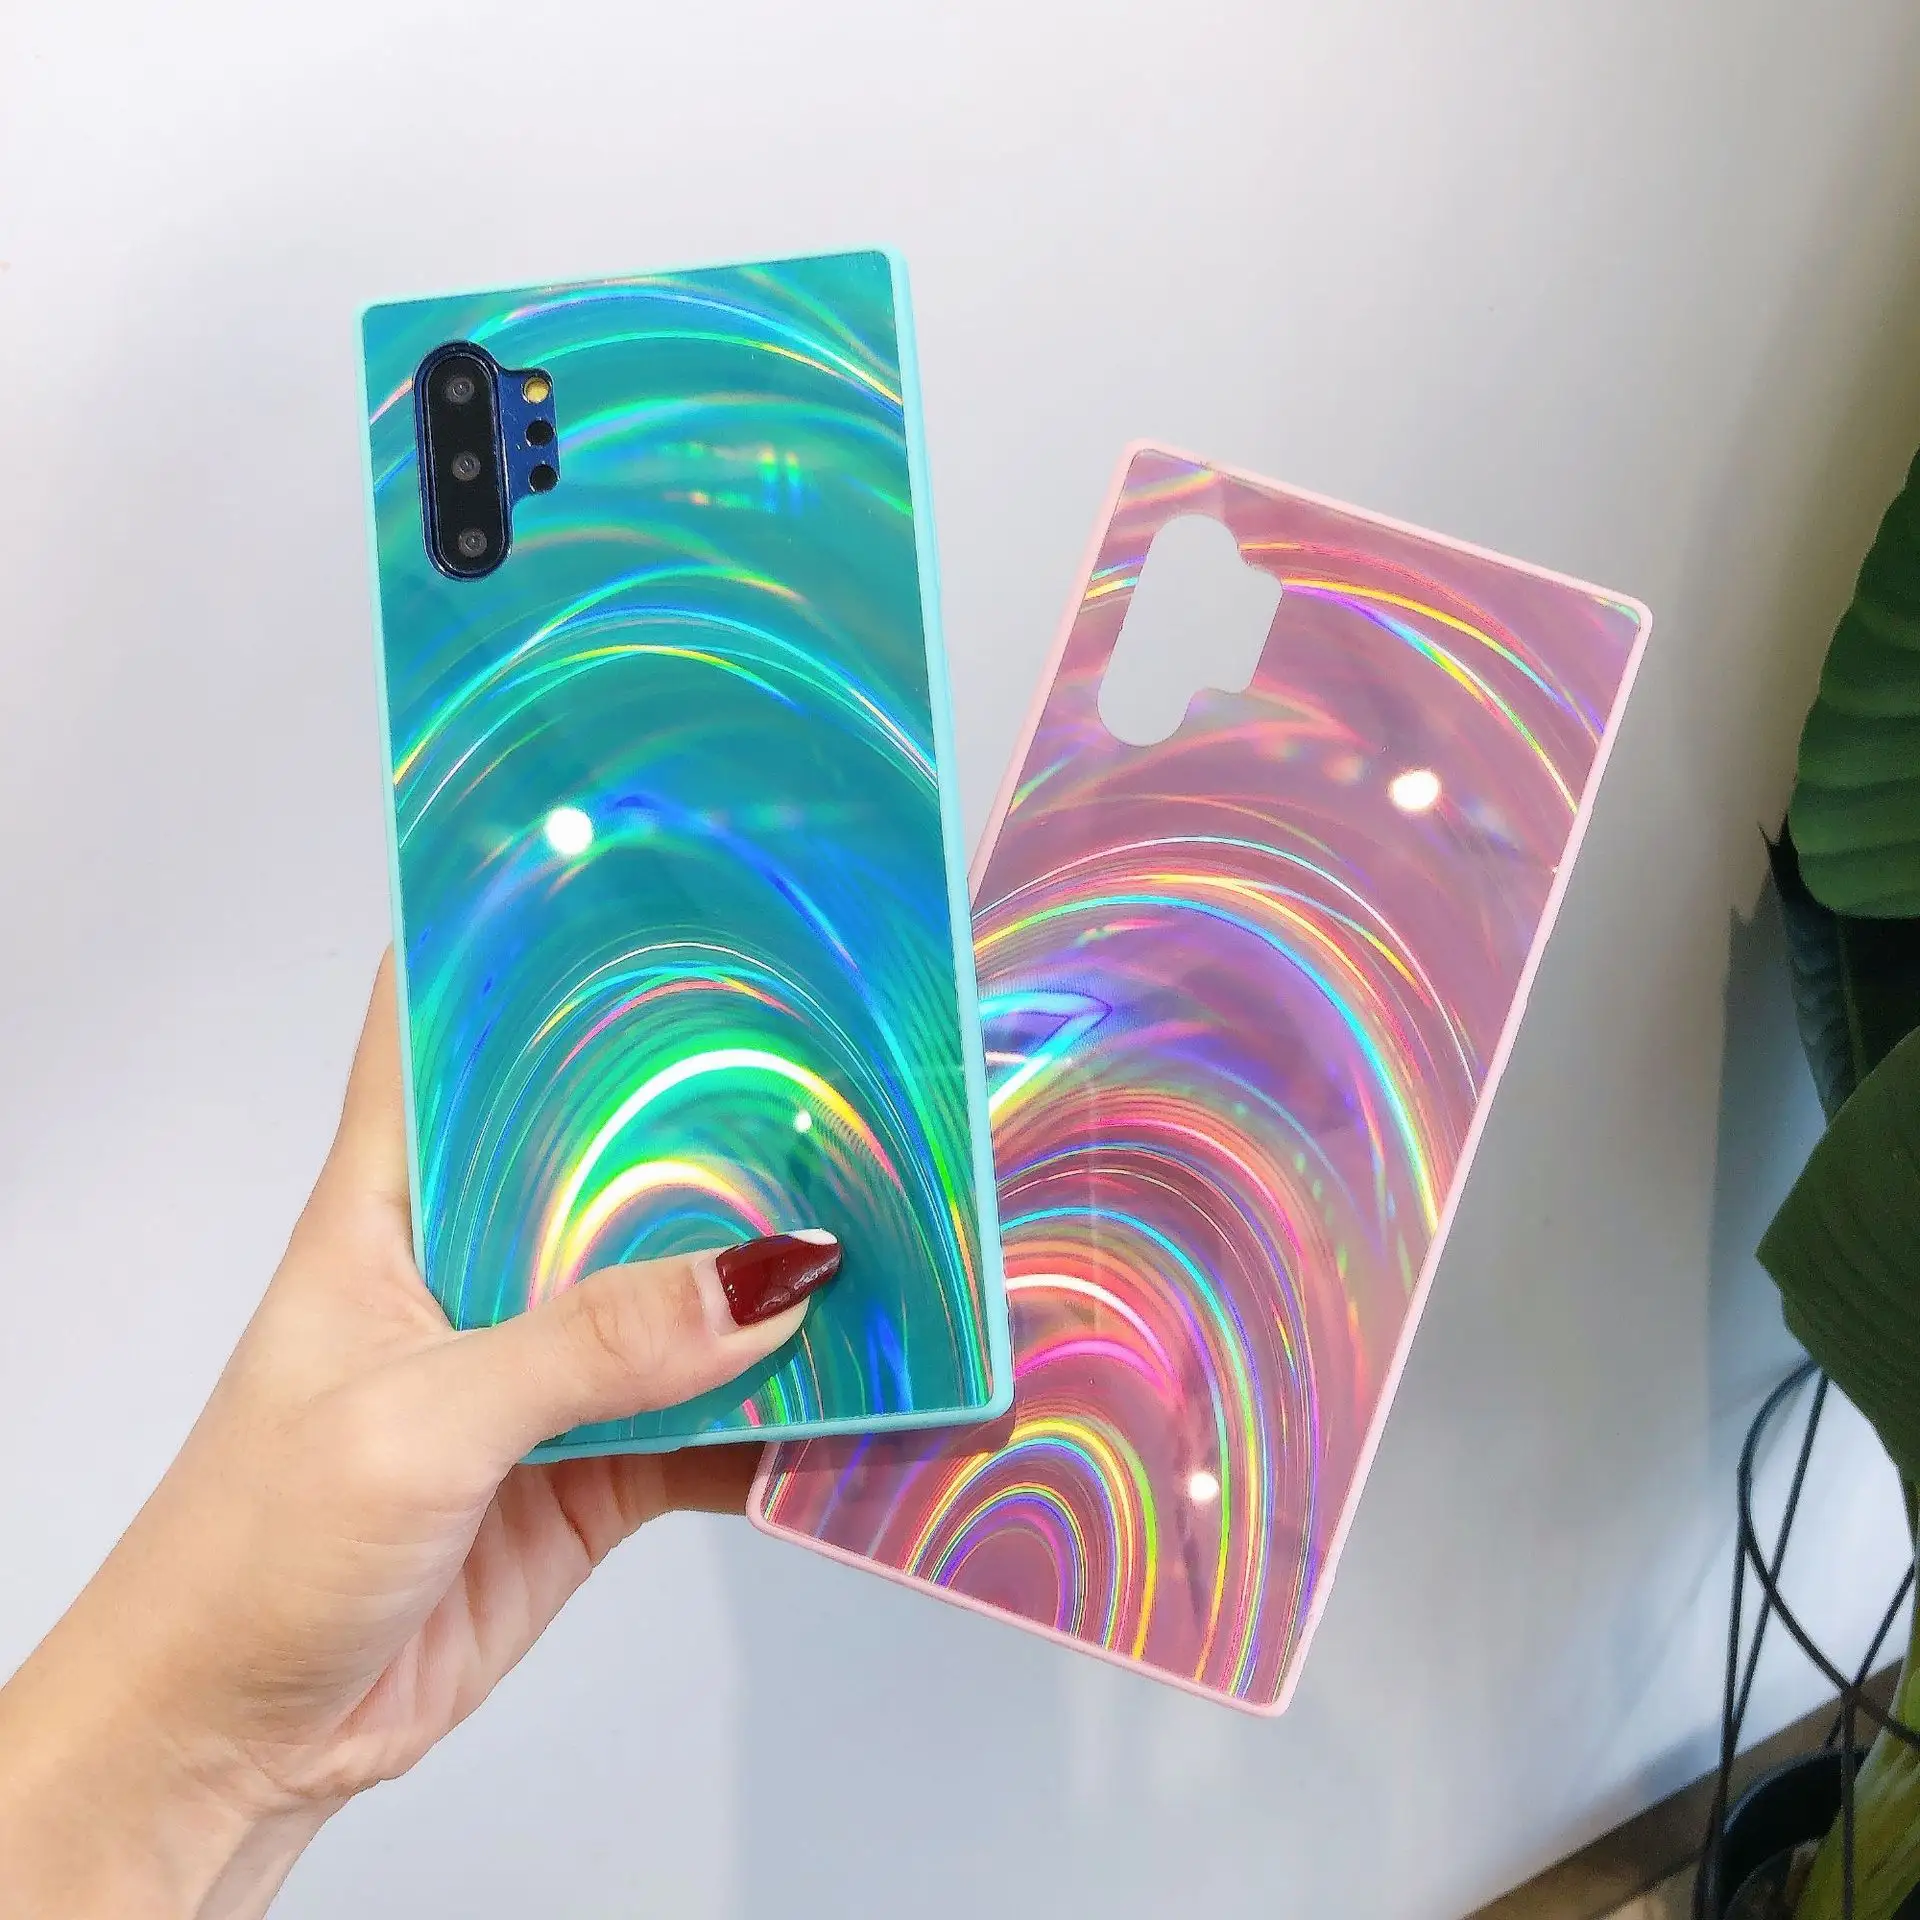 Shemax Holographic Rainbow for Samsung Note 20 Ultra Phone 5g,TPU Silicone Rubber Gel Shiny Reflective Gradient Bumper Cover